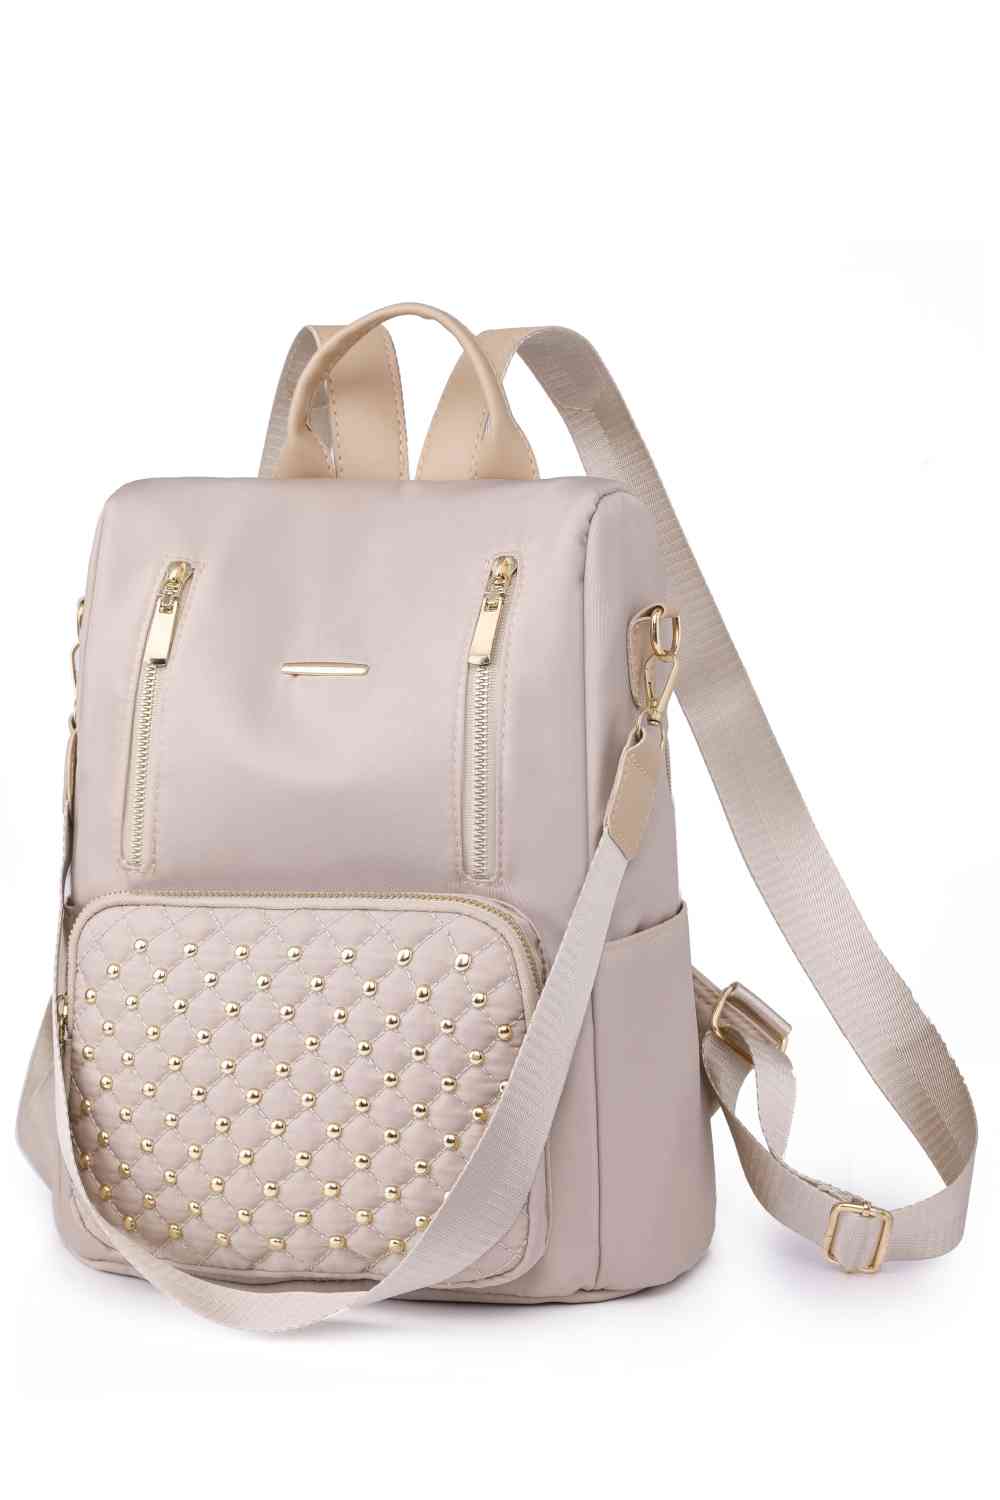 Zipper Pocket Beaded Backpack free shipping -Oh Em Gee Boutique